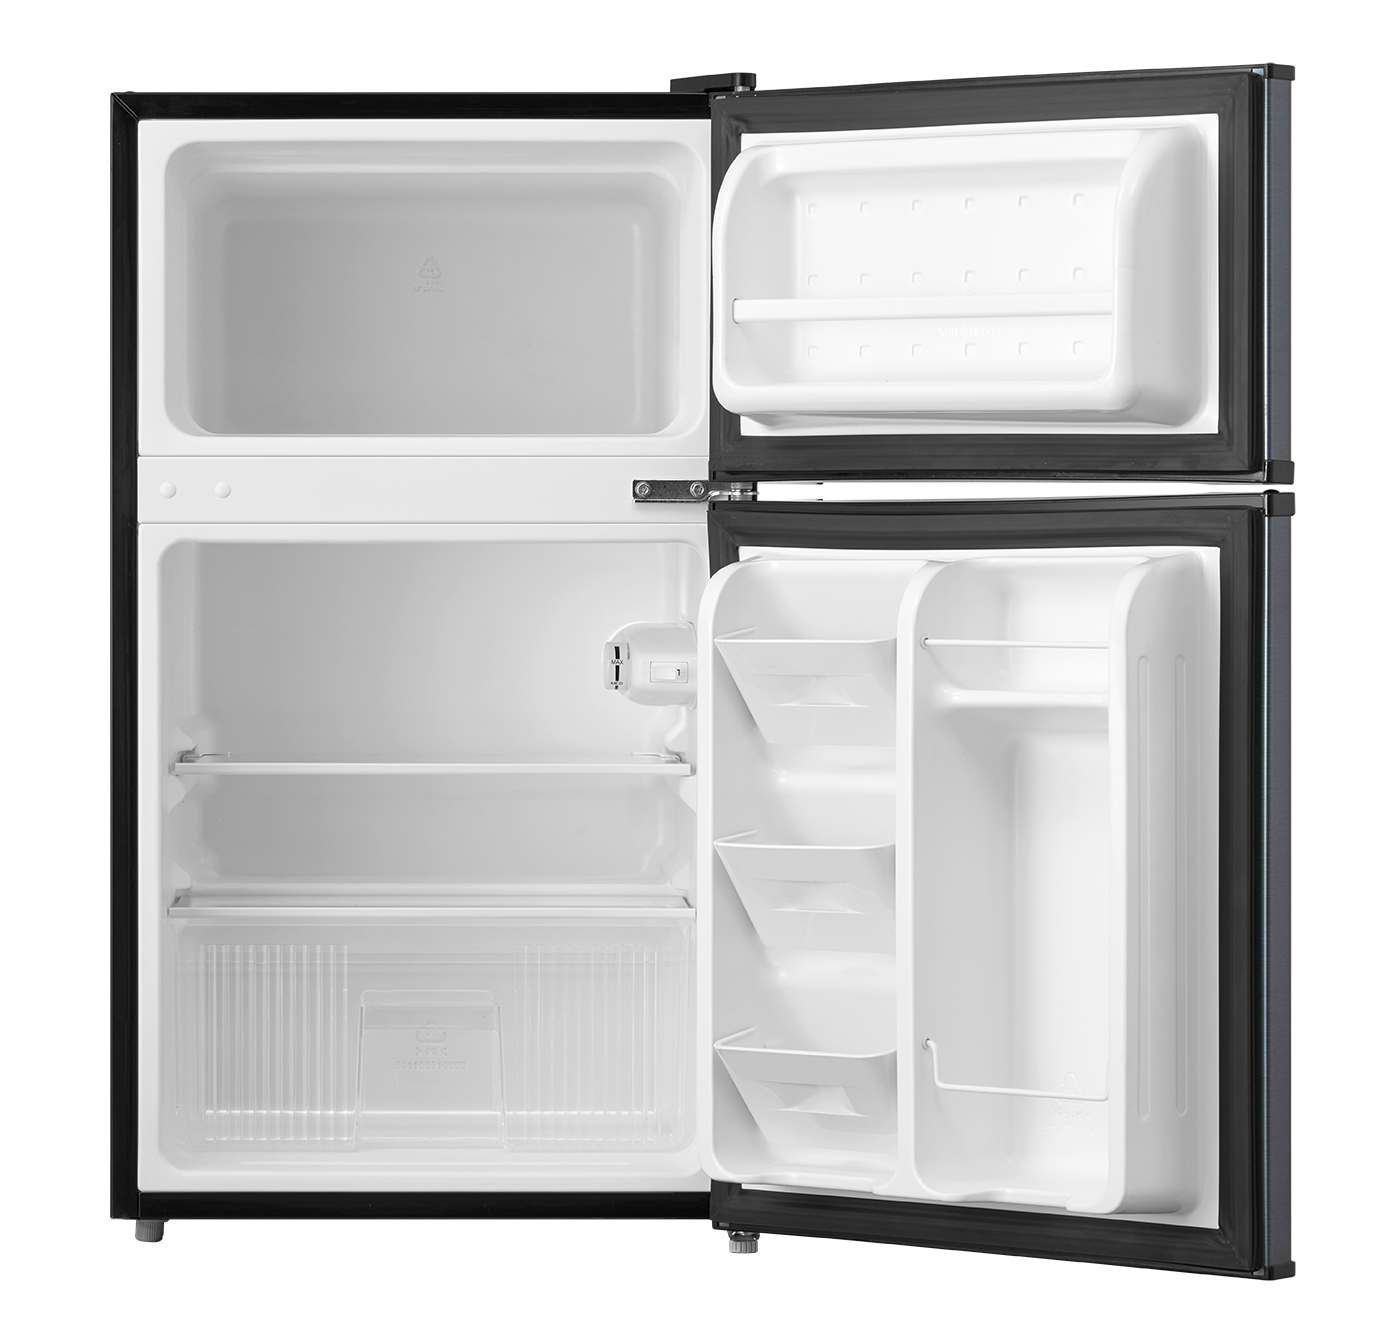 Arctic King 3.2 Cu ft Two Door Mini Fridge with Freezer, Stainless Steel, E-Star, ARM32D5ASL - image 6 of 21